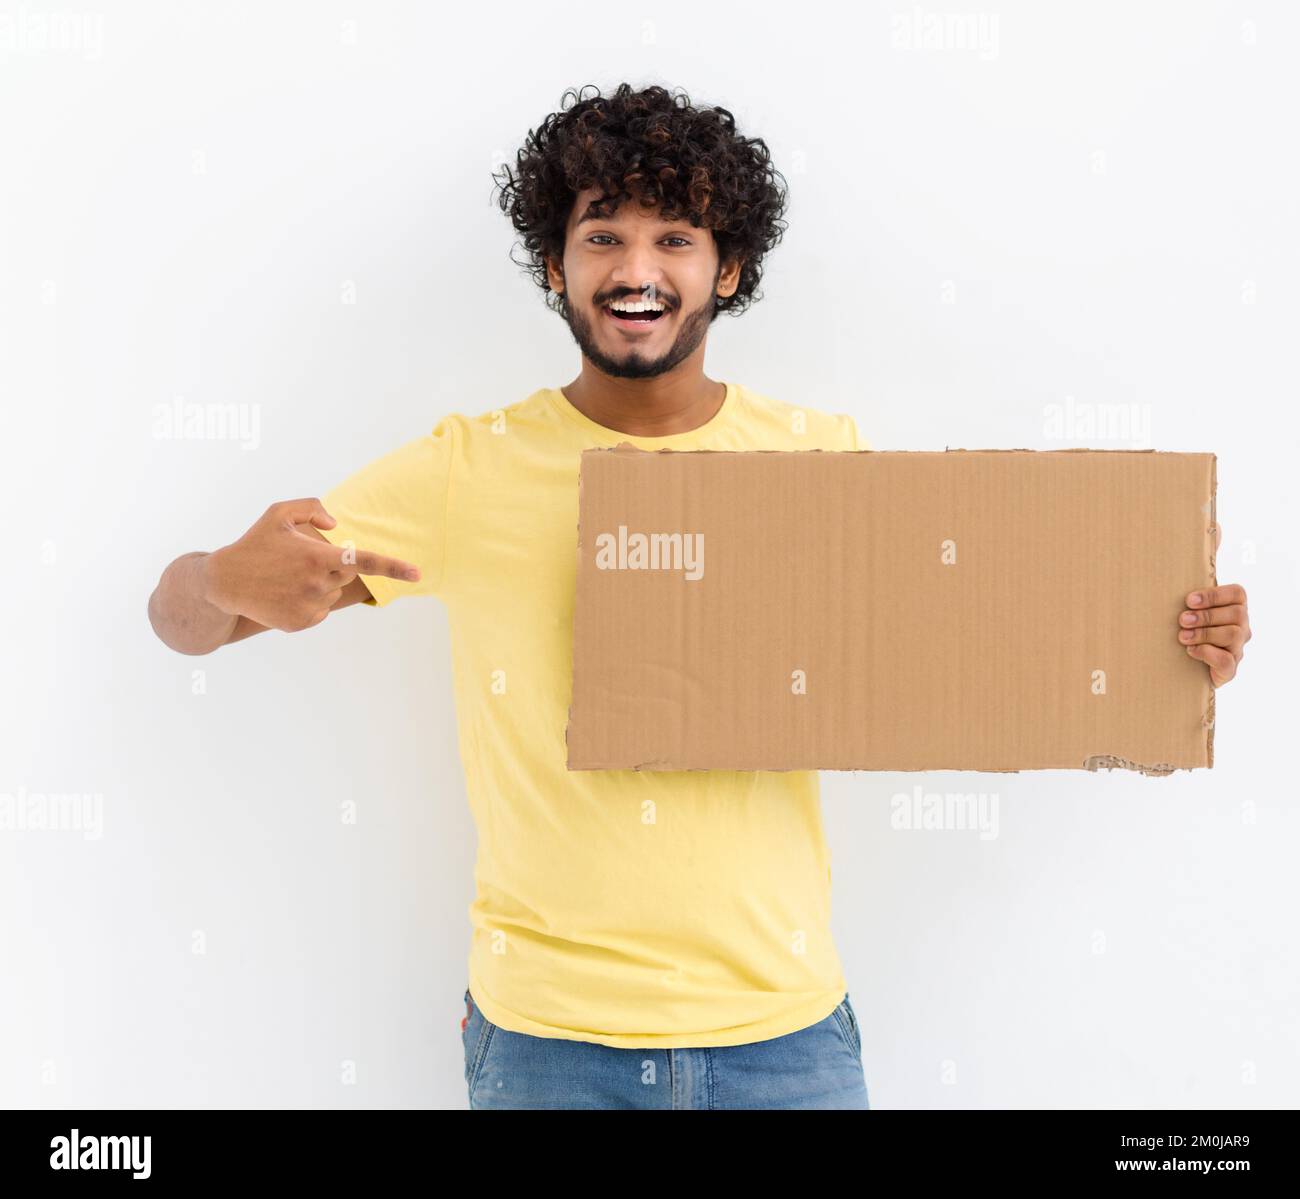 Young Asian man with curly hair and casual stylish clothes smiling, holding a piece of cardboard box and finger pointing Stock Photo